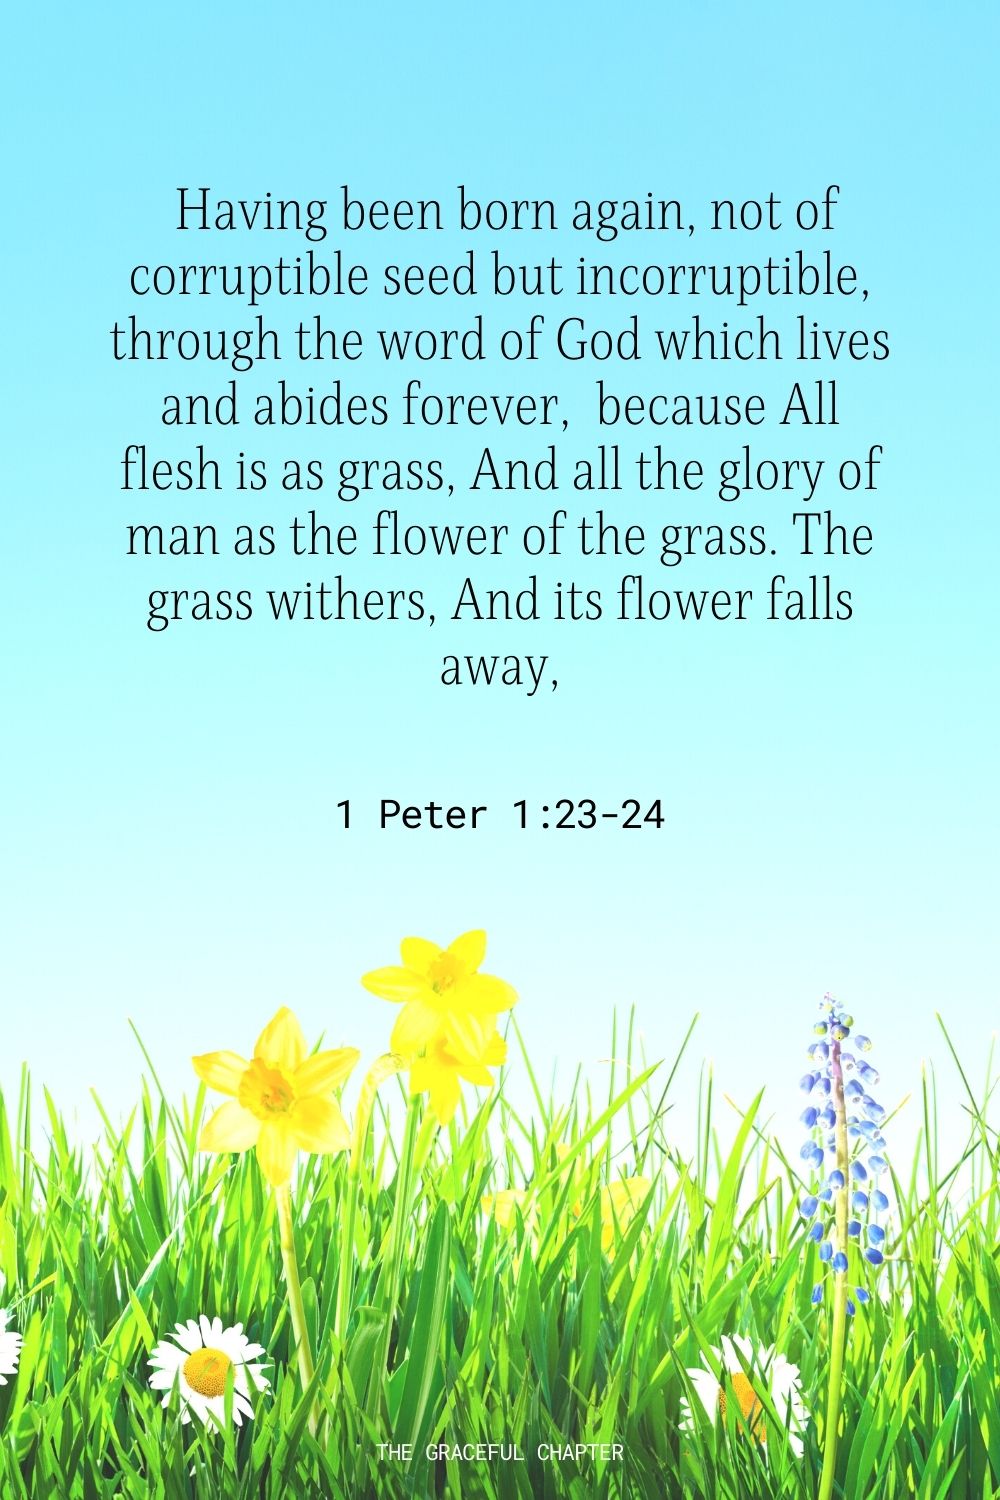  Having been born again, not of corruptible seed but incorruptible, through the word of God which lives and abides forever,  because All flesh is as grass, And all the glory of man as the flower of the grass. The grass withers, And its flower falls away, 1 Peter 1:23-24